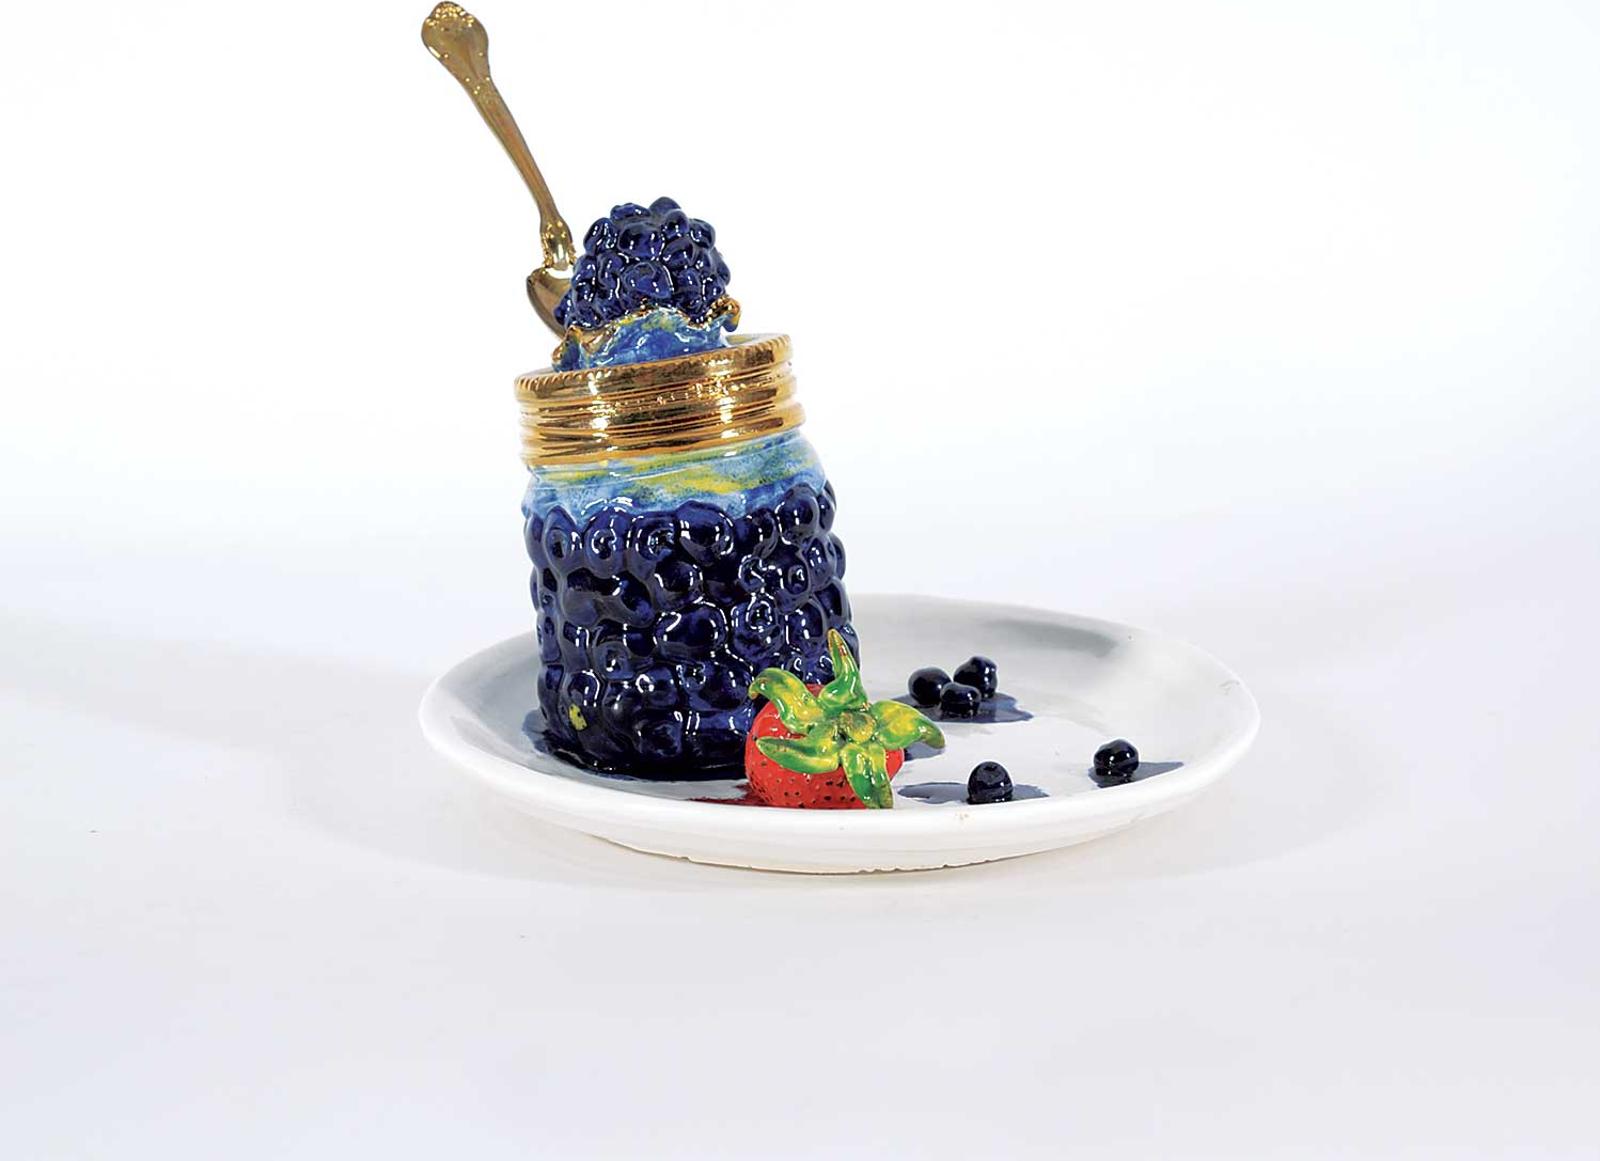 Victor Cicansky (1935) - Untitled - Delectable Dish of Blueberries with a Strawberry Side